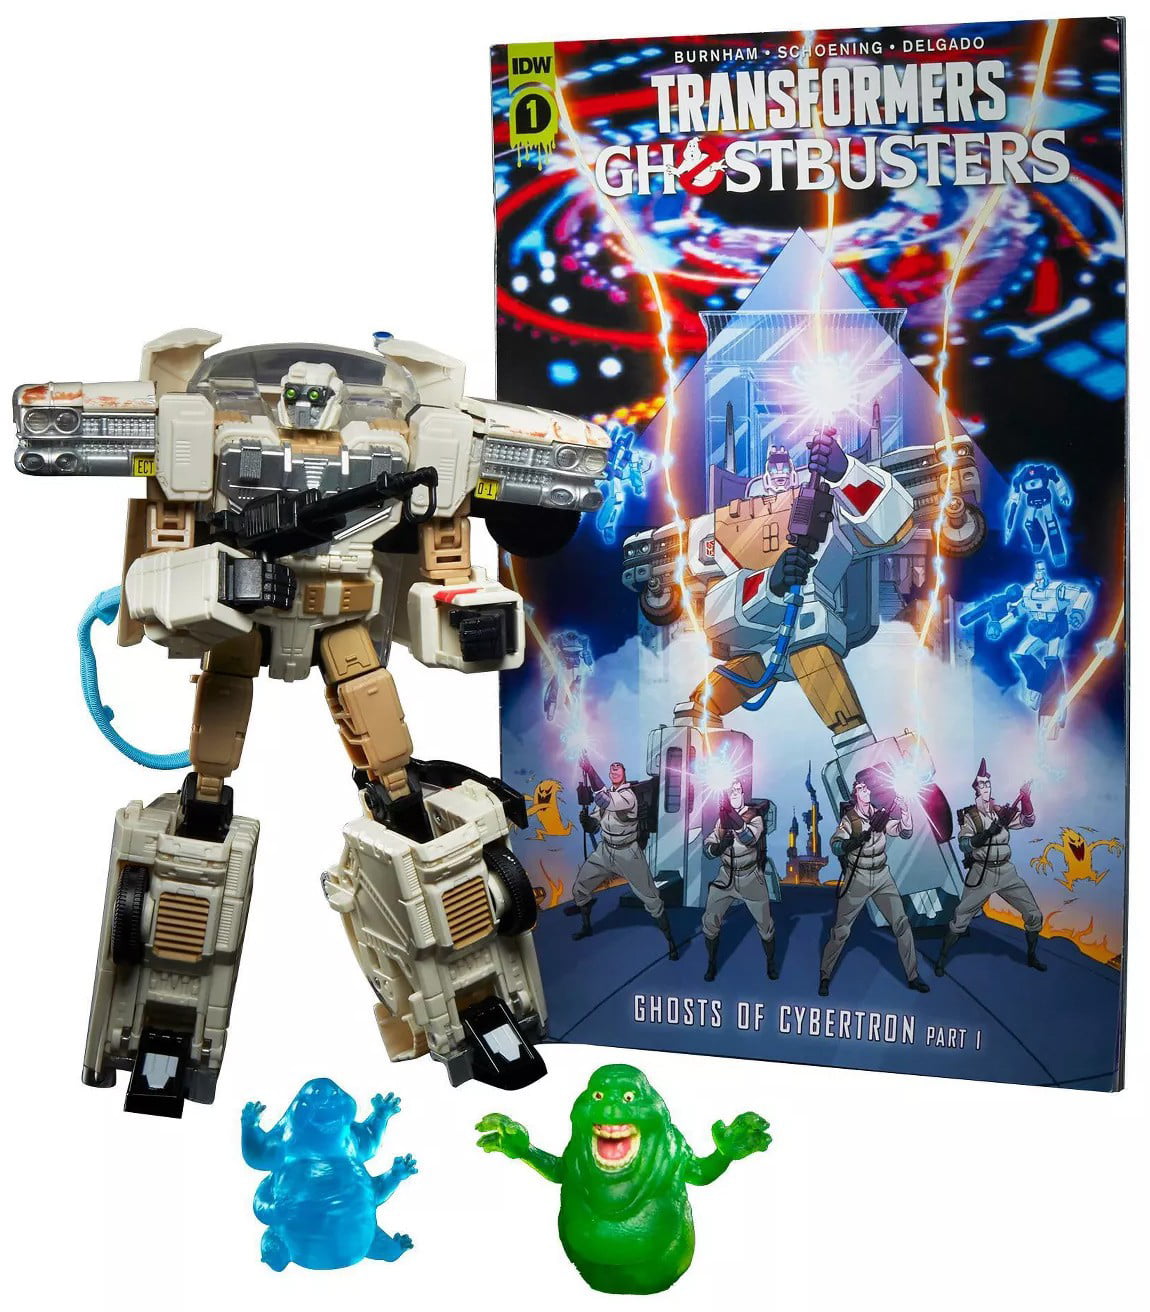 IN STOCK Transformers Ghostbusters Ectotron Ecto-1 ACTION FIGURE 